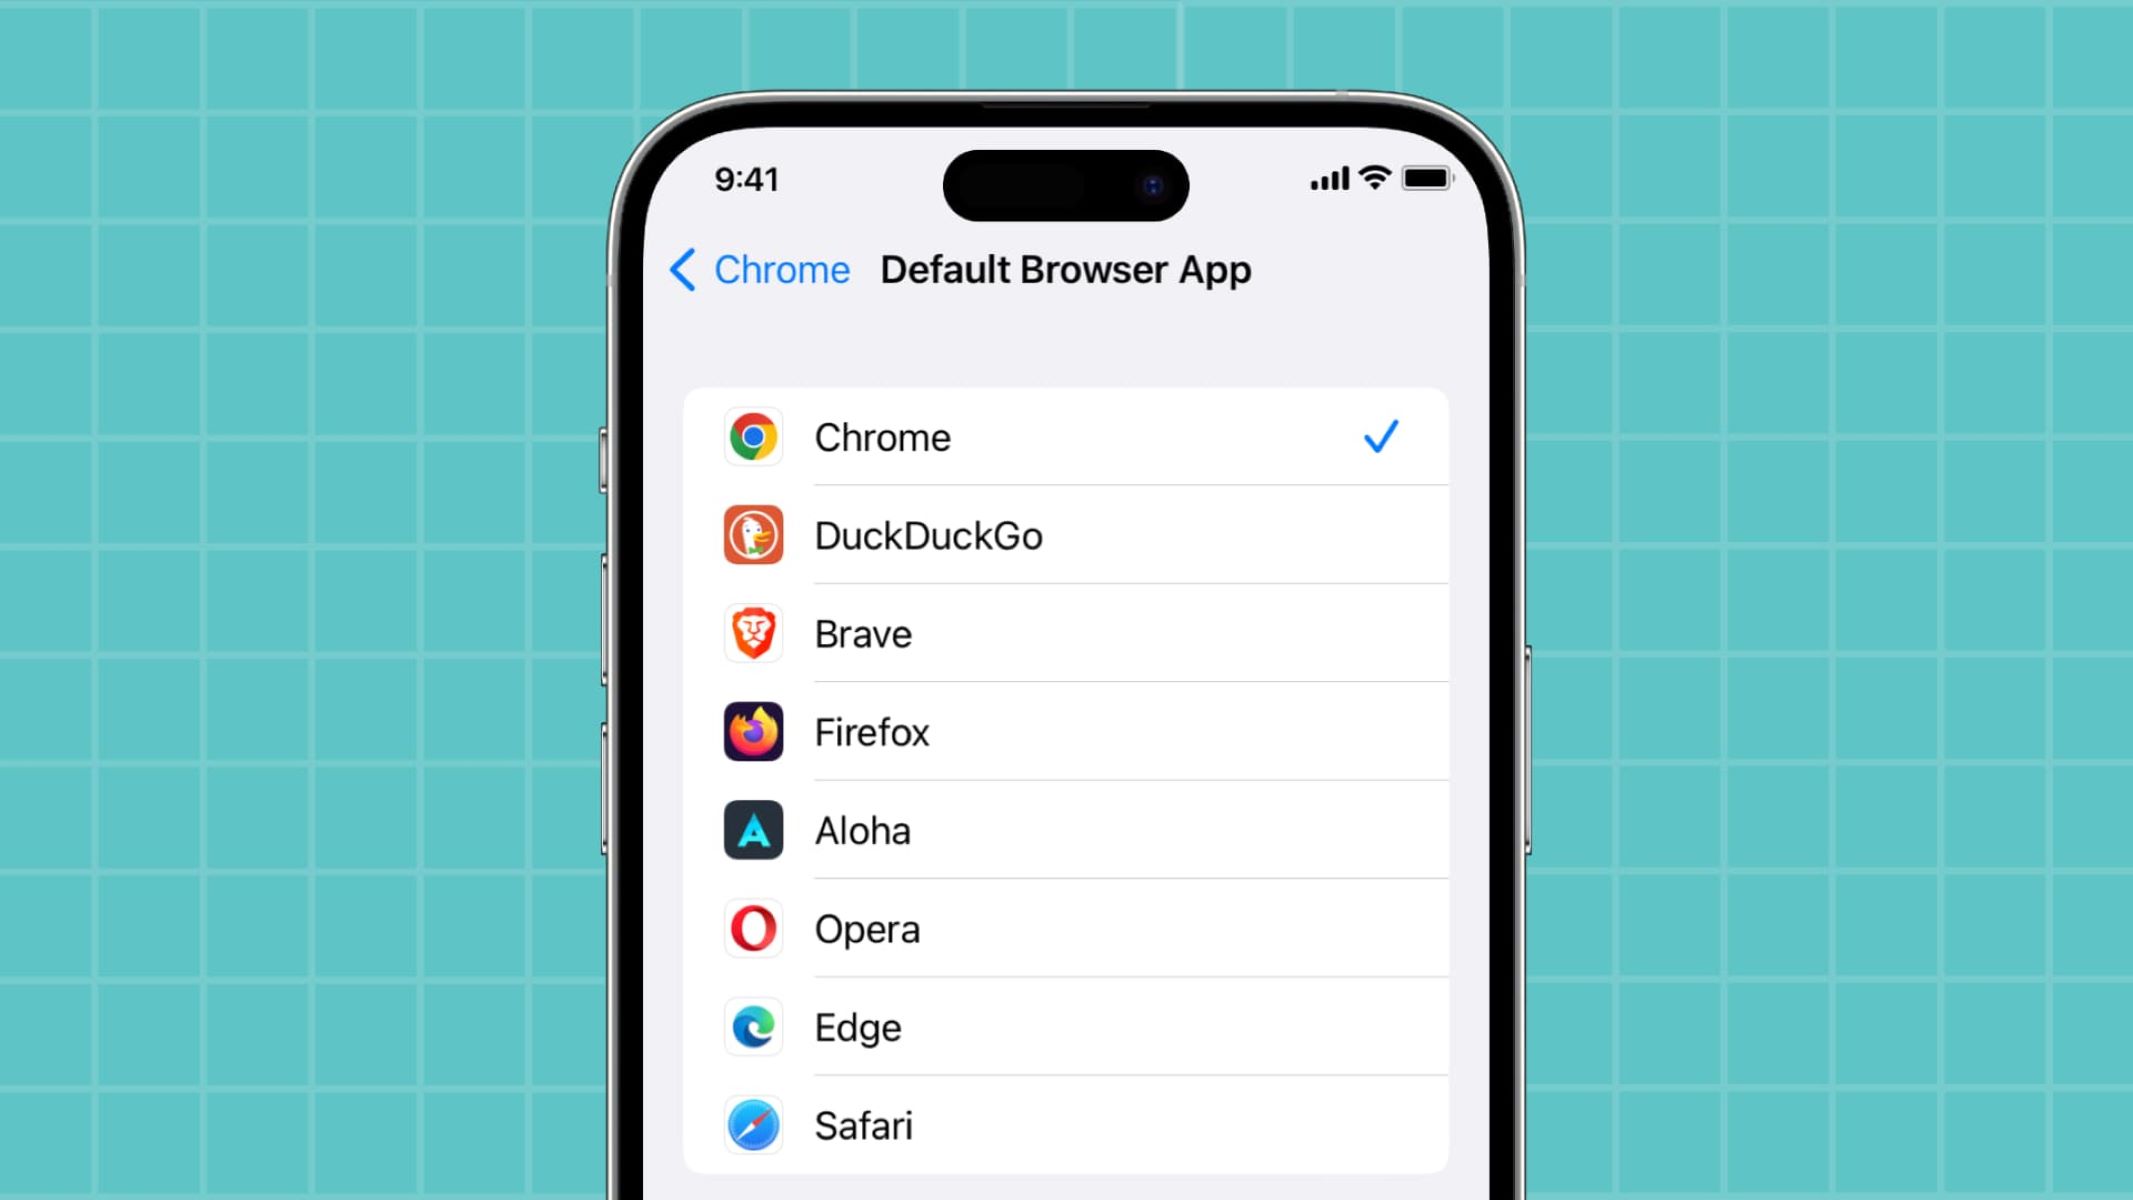 How To Make Chrome Default Browser On iPhone